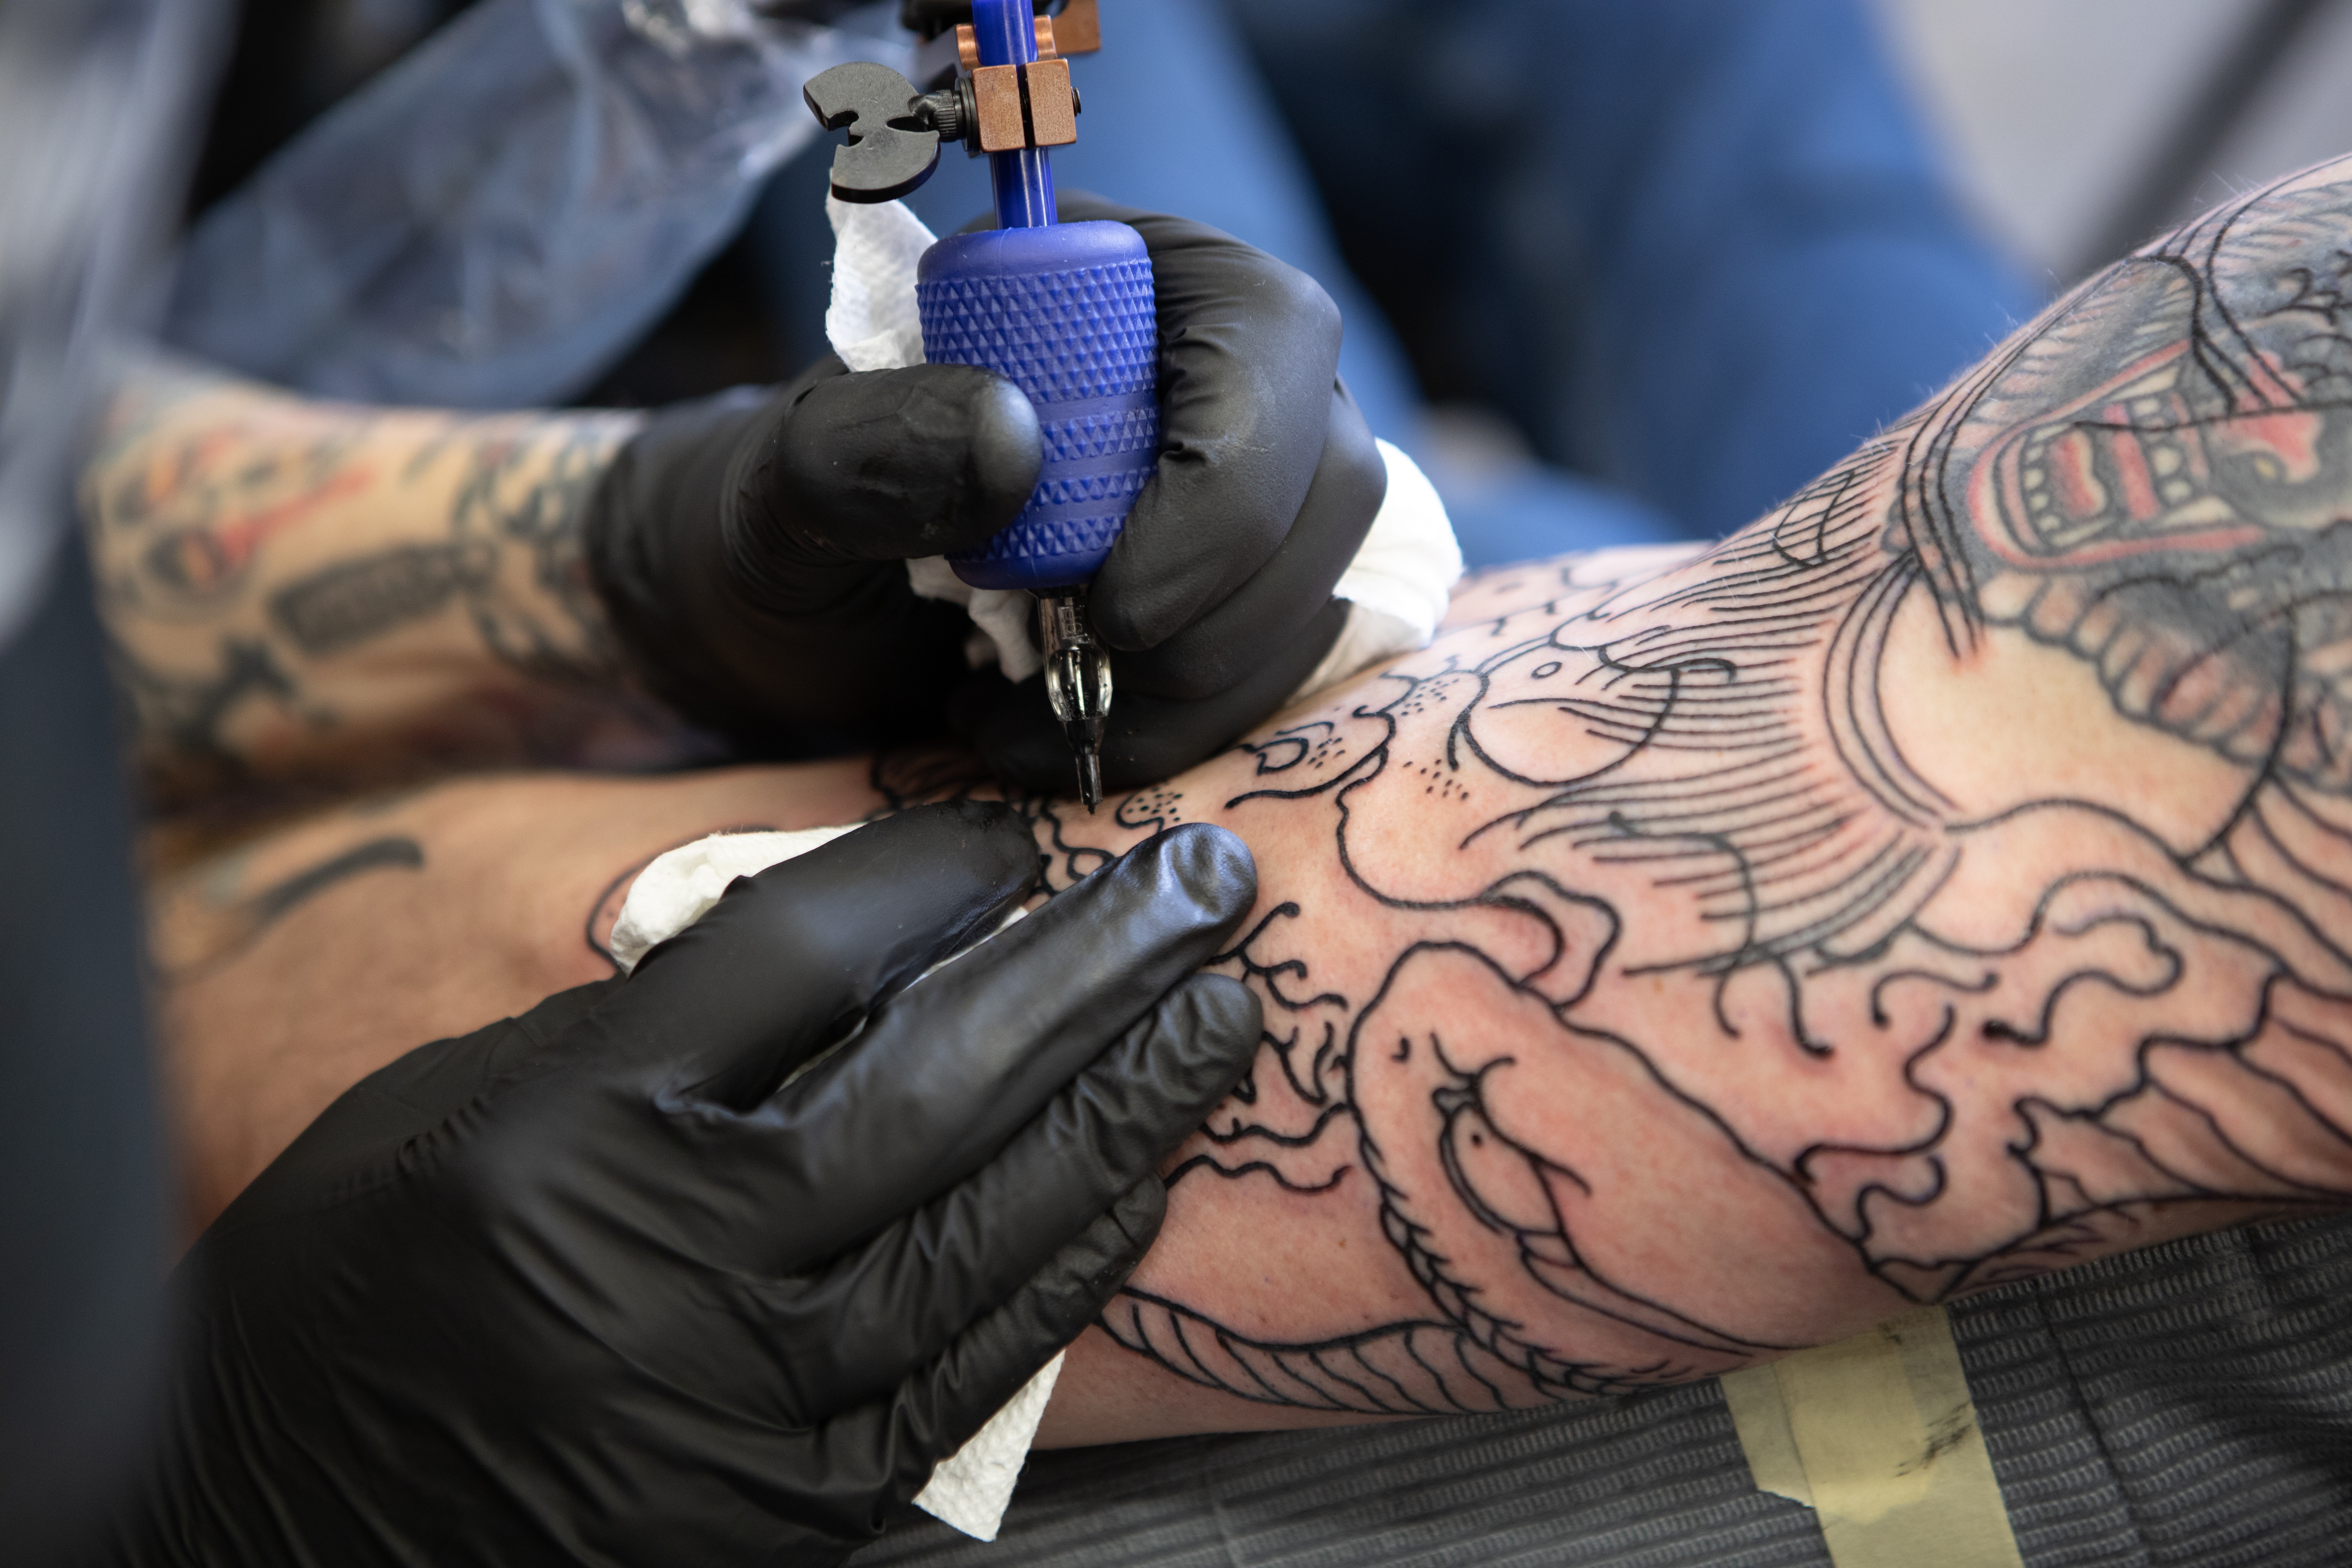 a kelowna tattoo artist closeup of their hands tattooing an arm with outline traditional style